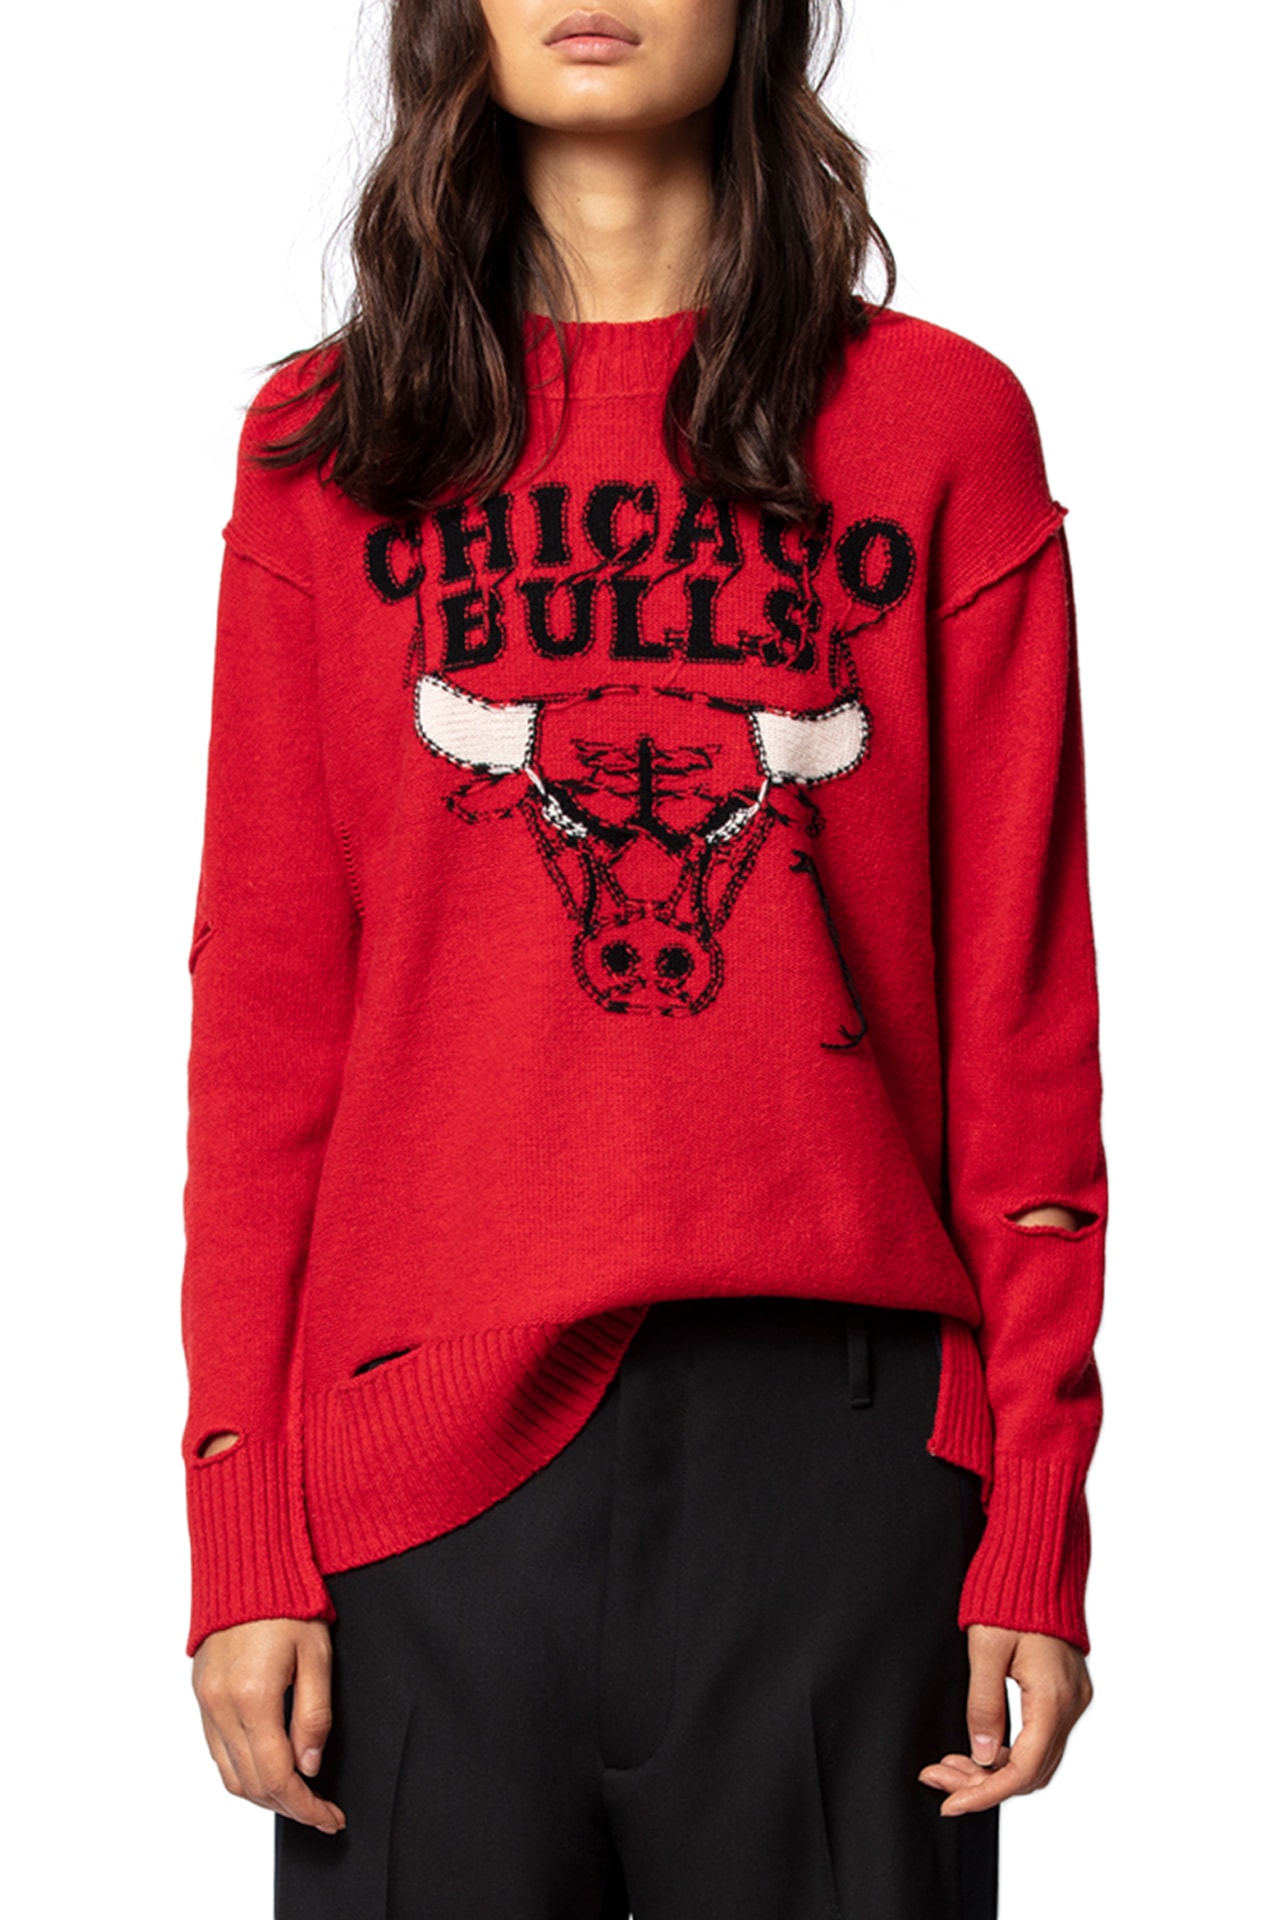 Zadig Voltaire NBA Collection Teaser Lookbook Collaboration The Tunnel Lakers Grizzles Bulls destroyed sweaters womens tank tops jewerly cecile fricker cecila bonstrom thierry gillier sporty fall winter 2019